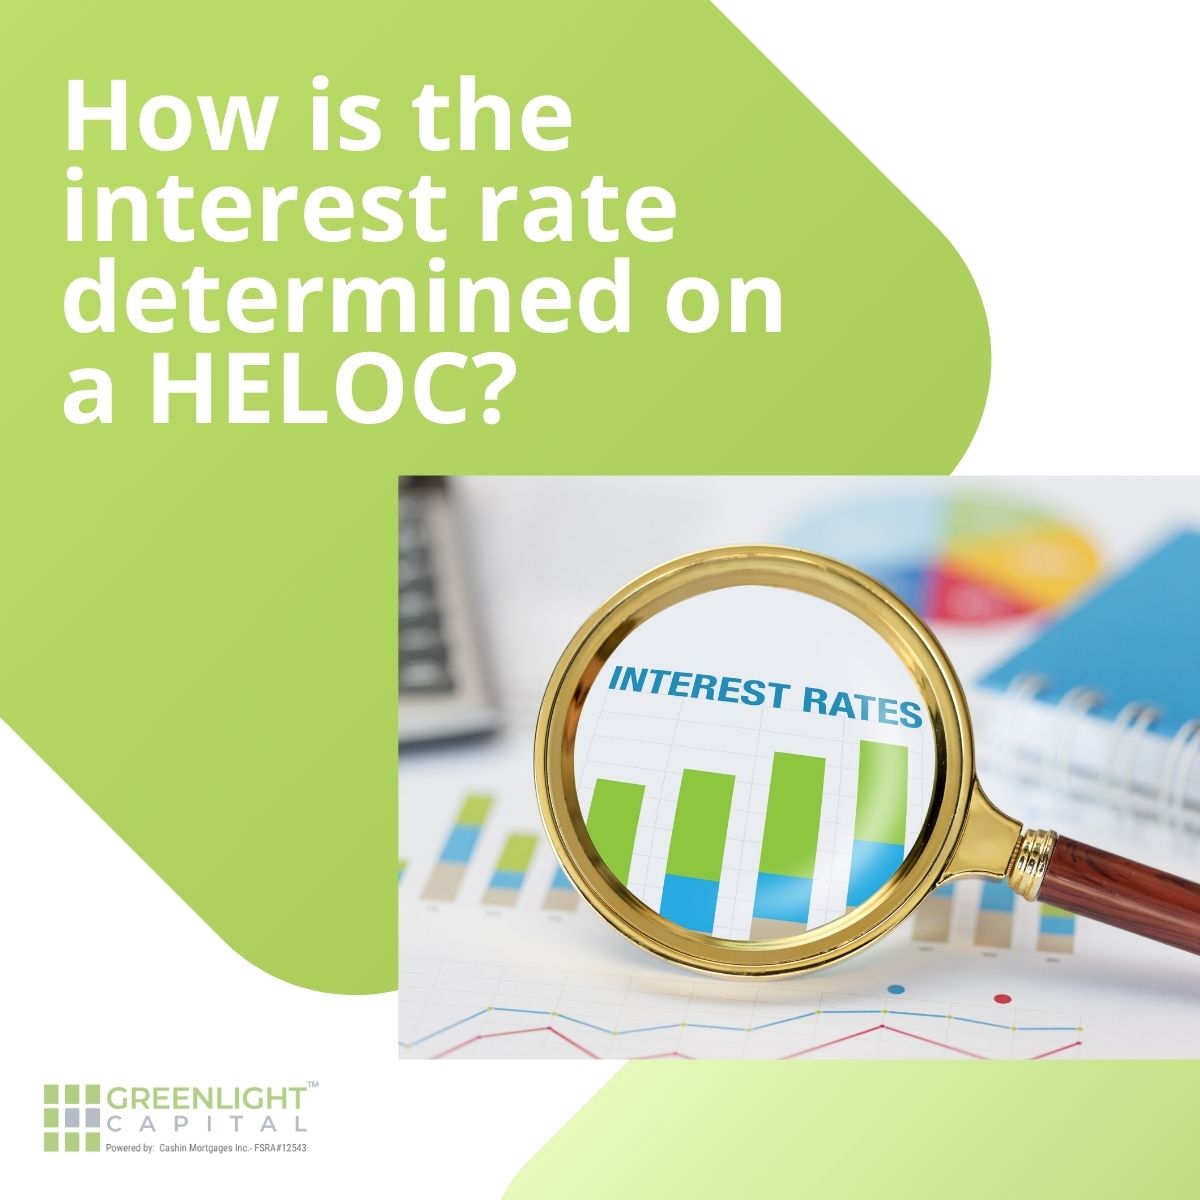 Our HELOC's interest rate adjusts daily based on your outstanding balance. 💳📈

#HELOC #DailyInterest #FinancialFlexibility #Heloc #HomeEquity #Gogreenlightloans #GreenlightCapital